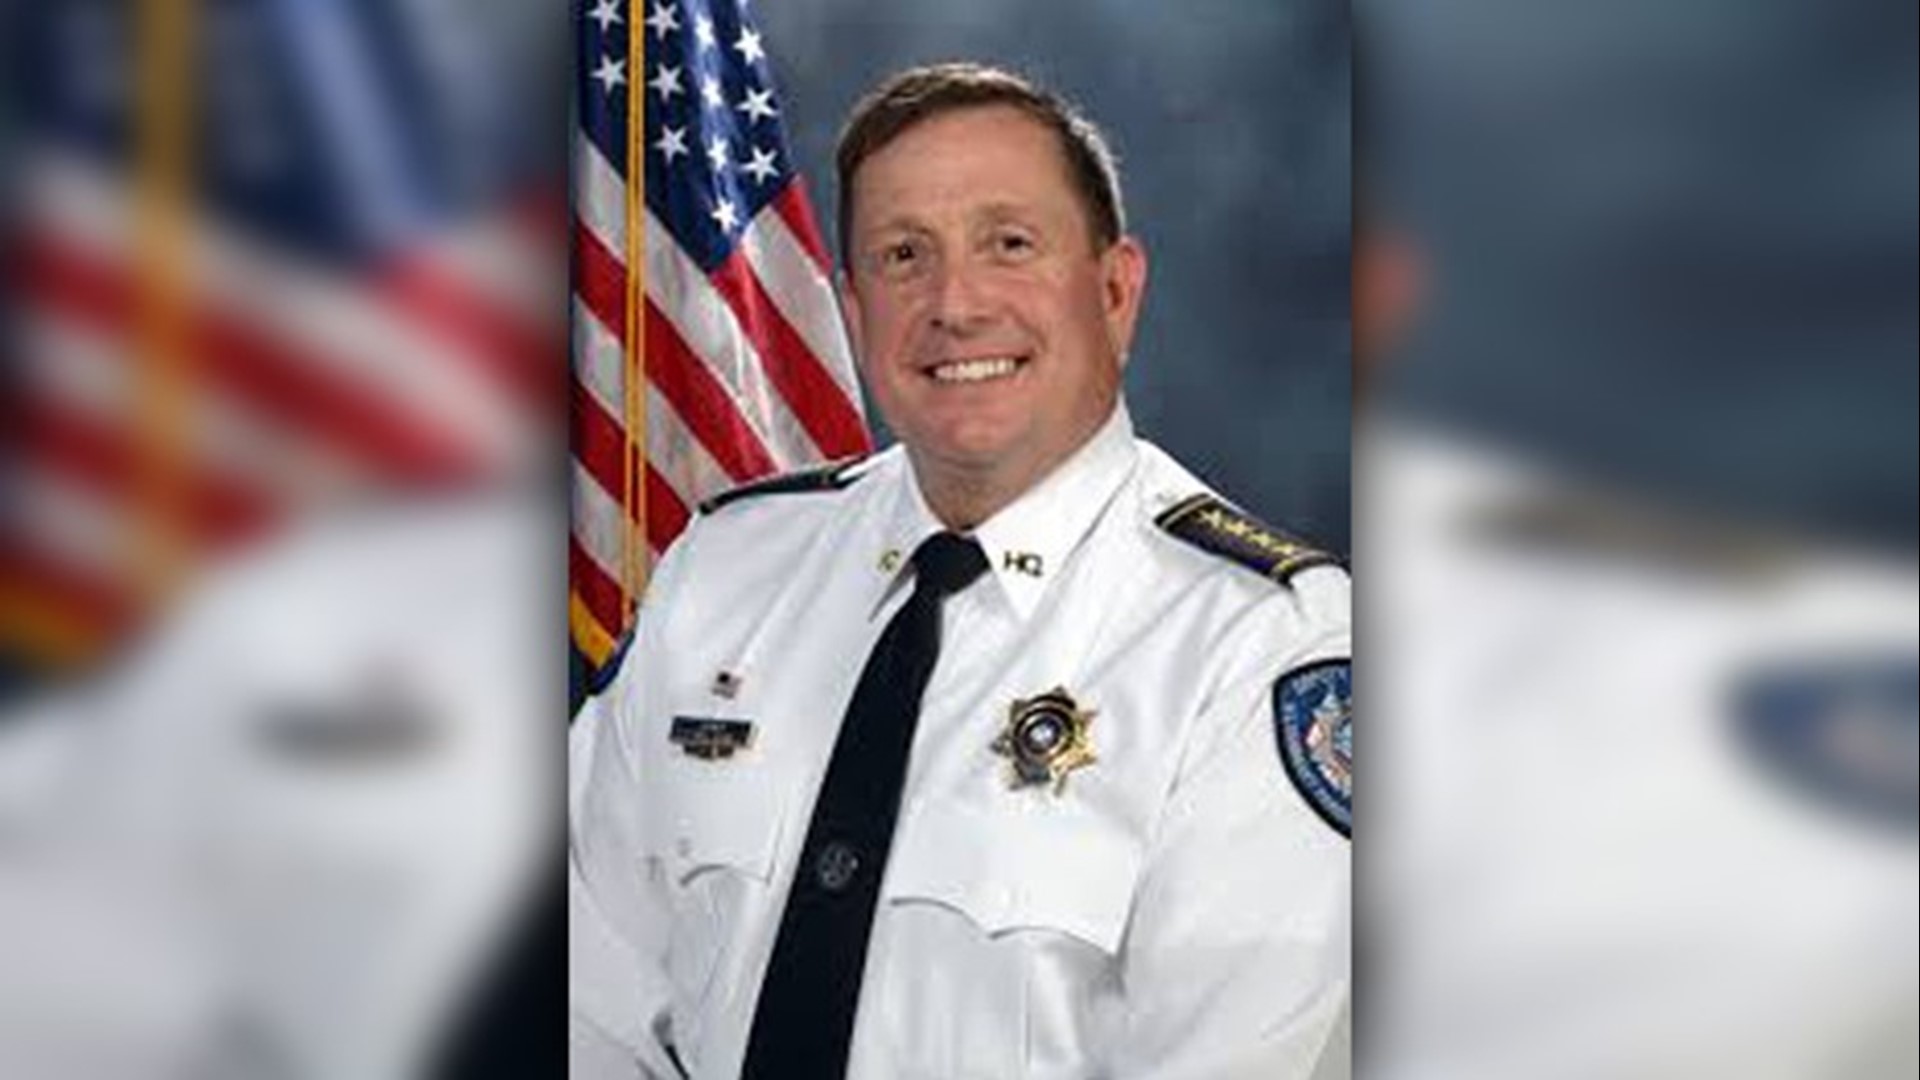 St. Tammany Parish Sheriff Randy Smith to announce reelection campaign